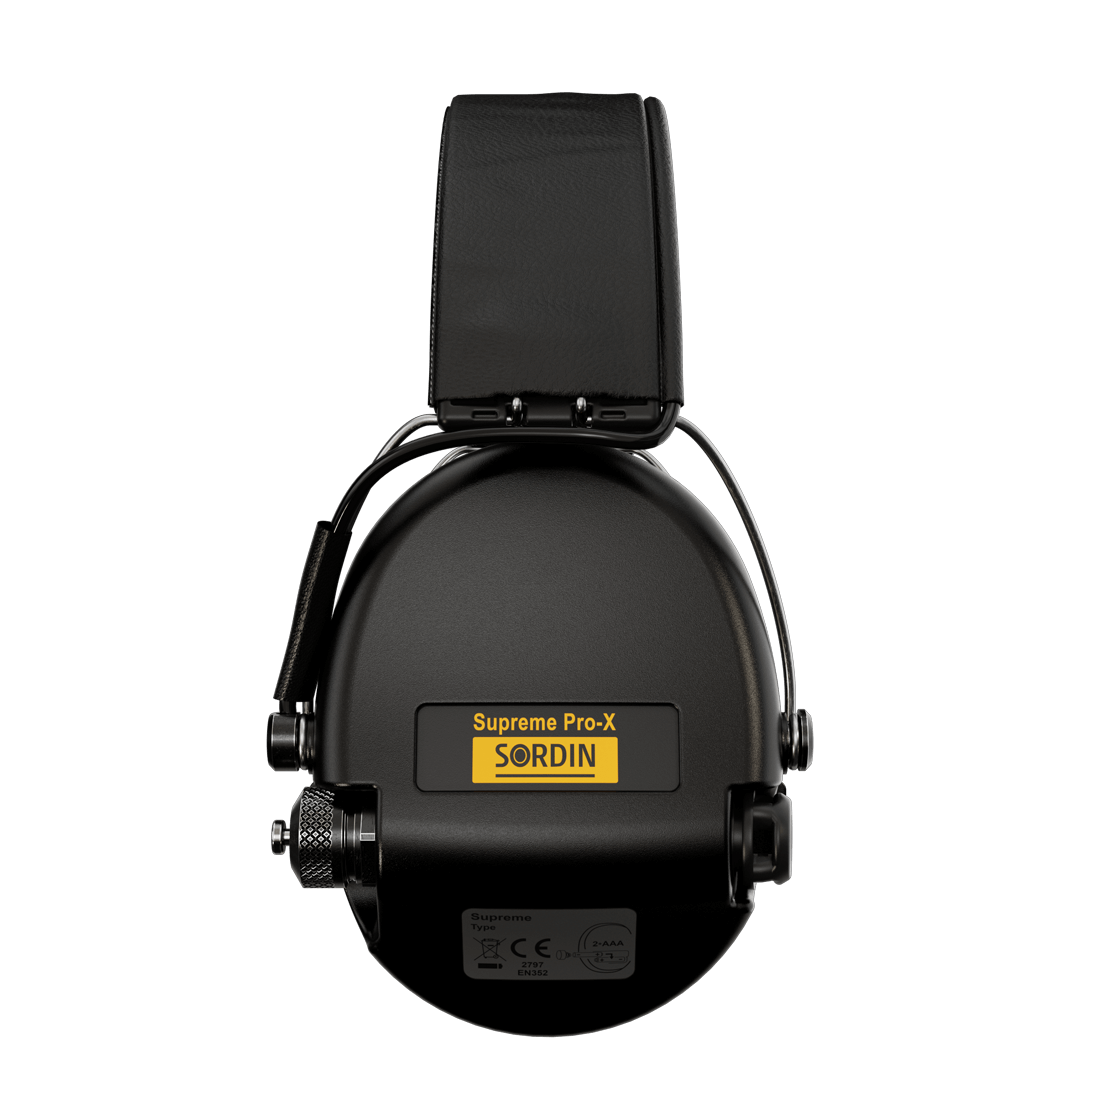 Sordin Supreme Pro-X Electronic Hearing Protection - Black Leather Headband Black Cup Colour Tactical Gear Australia Supplier Distributor Dealer